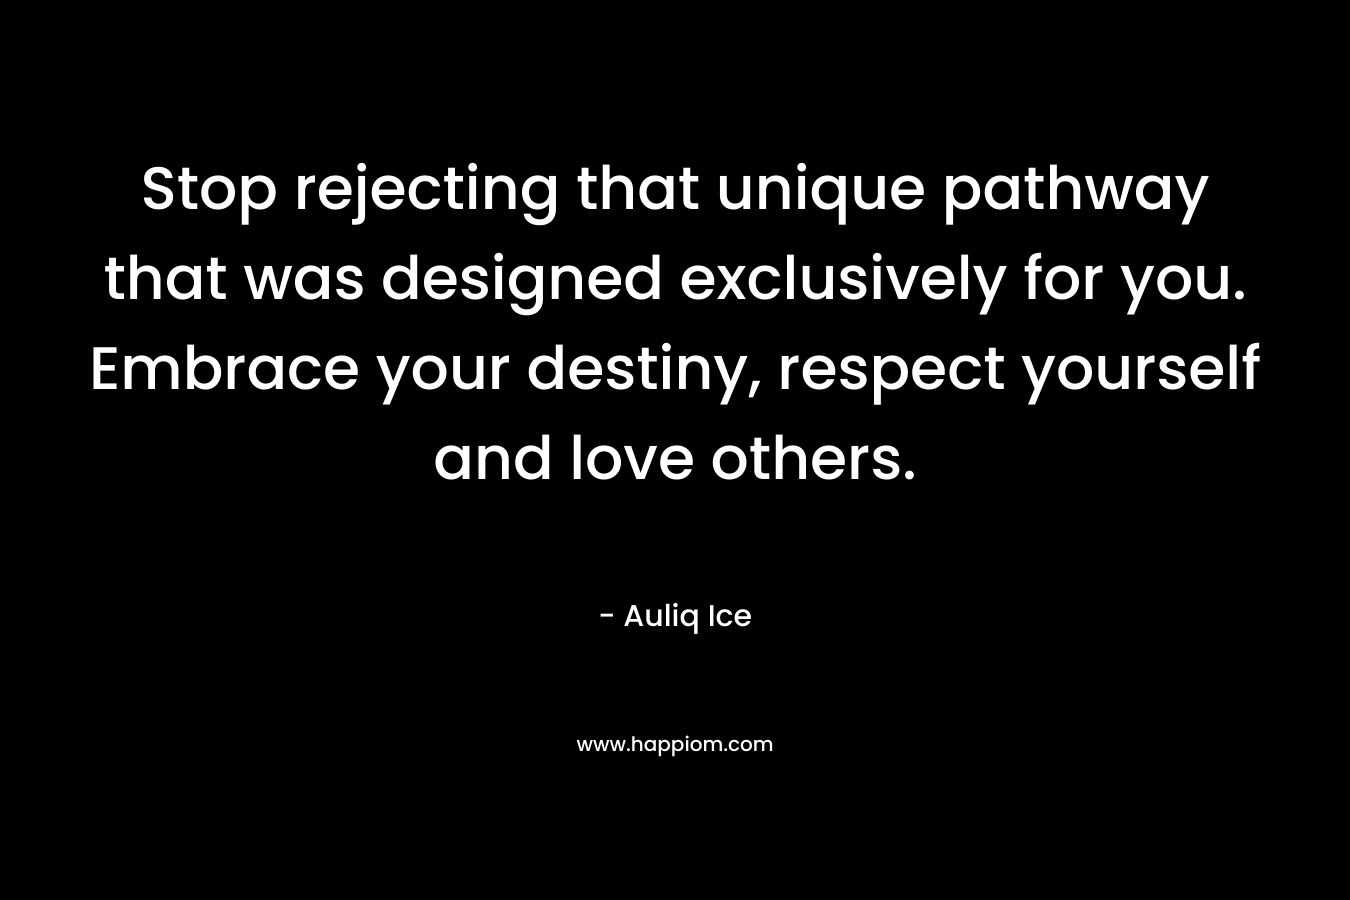 Stop rejecting that unique pathway that was designed exclusively for you. Embrace your destiny, respect yourself and love others. – Auliq Ice